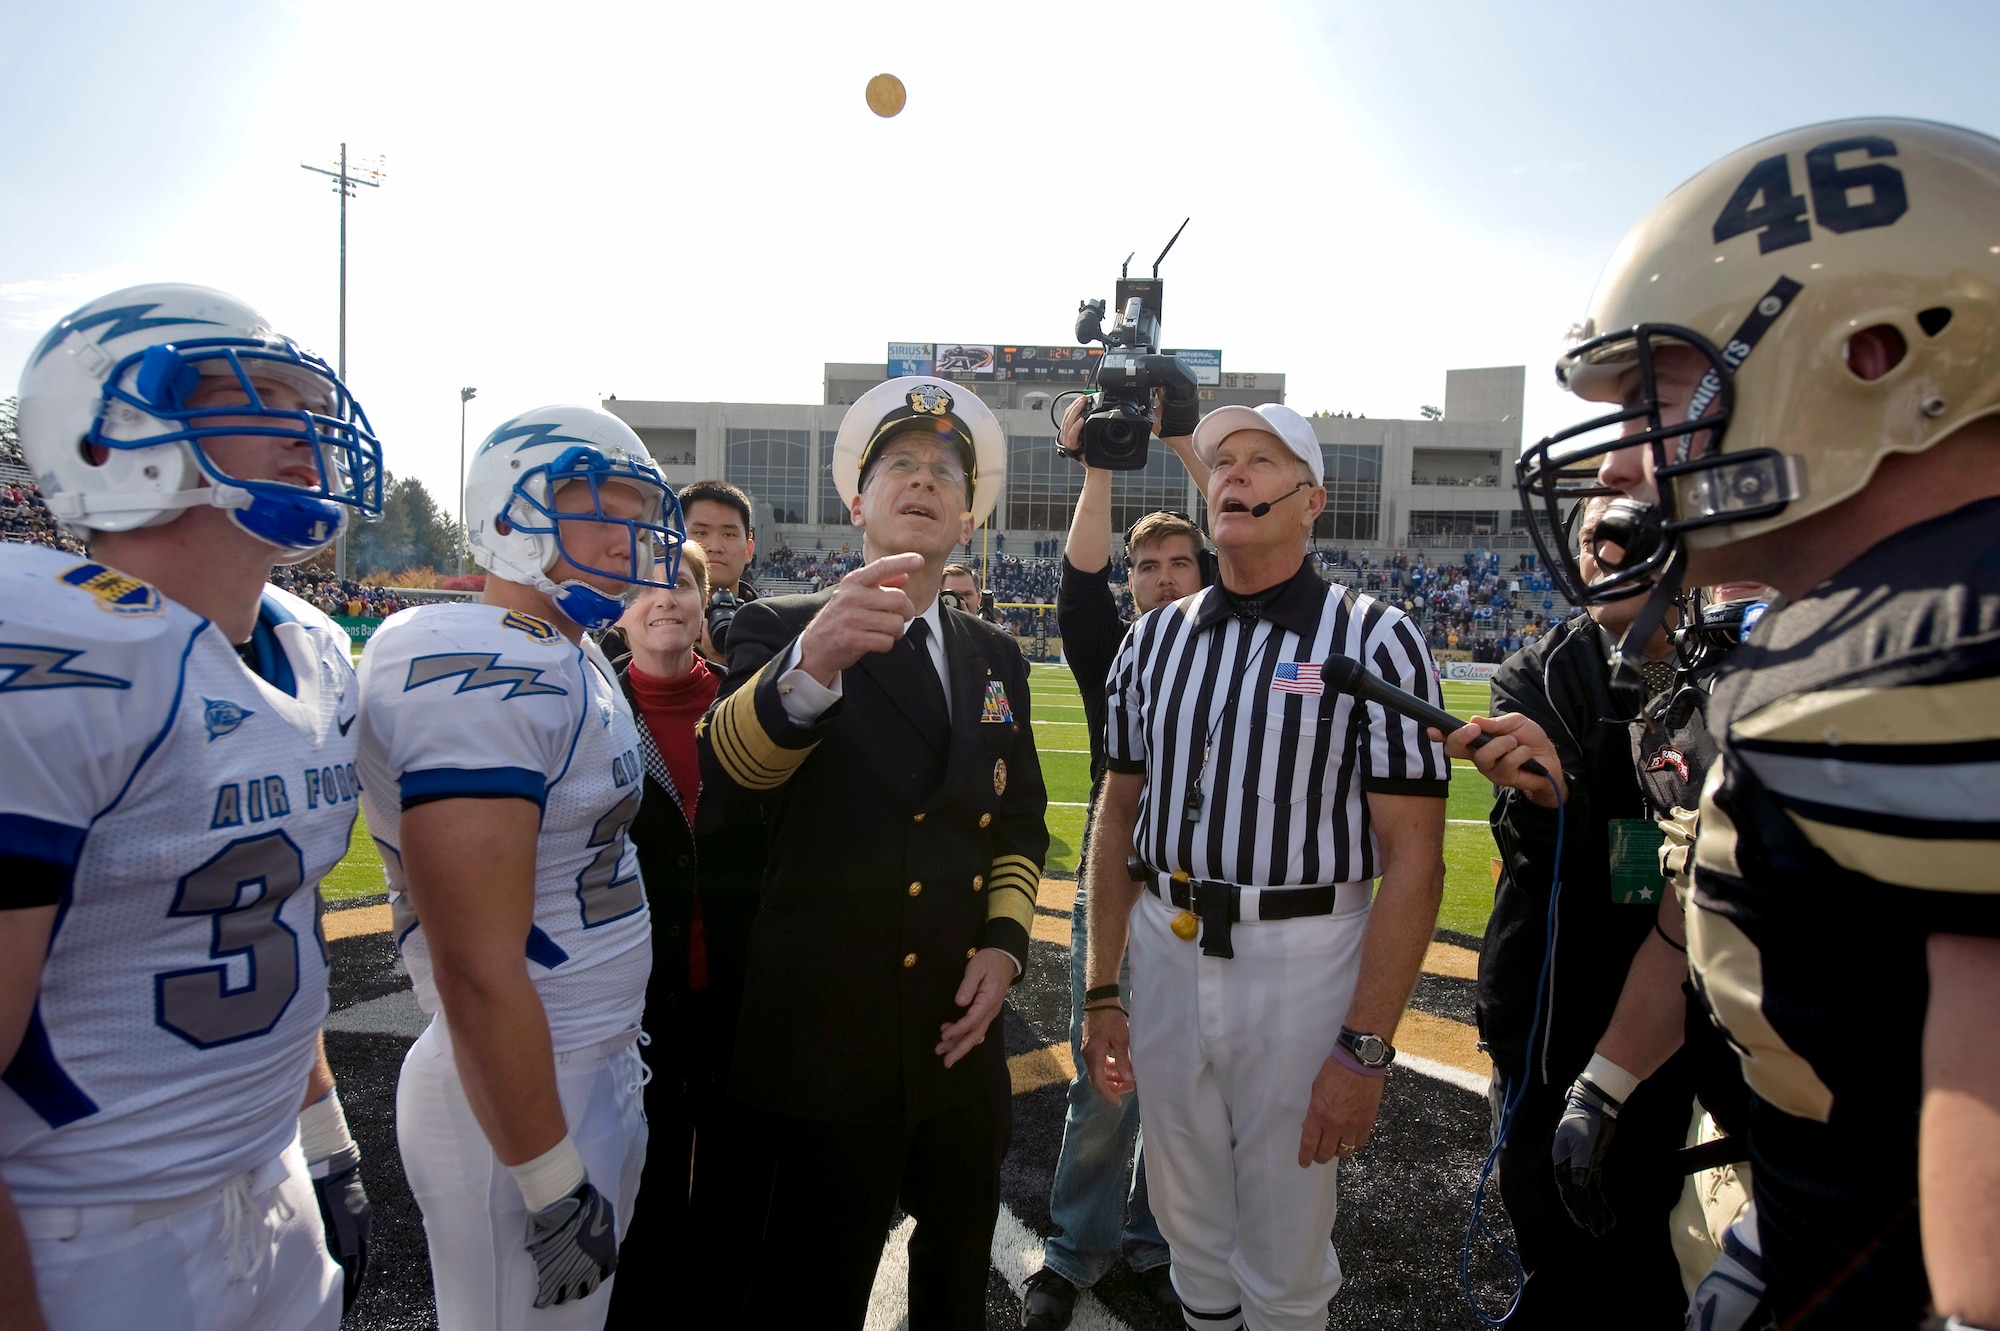 Navy Adm. Michael G. Mullen flips a coin at the beginning of the U.S. Military Academy and U.S. Air Force Academy football game Nov. 1 at West Point, N.Y. The Falcons defeated the Black Knights 16-7 in the annual battle. Admiral Mullen is the chairman of the Joint Chiefs of Staff. (Defense Department photo/Navy Petty Officer 1st Class Chad J. McNeeley) 